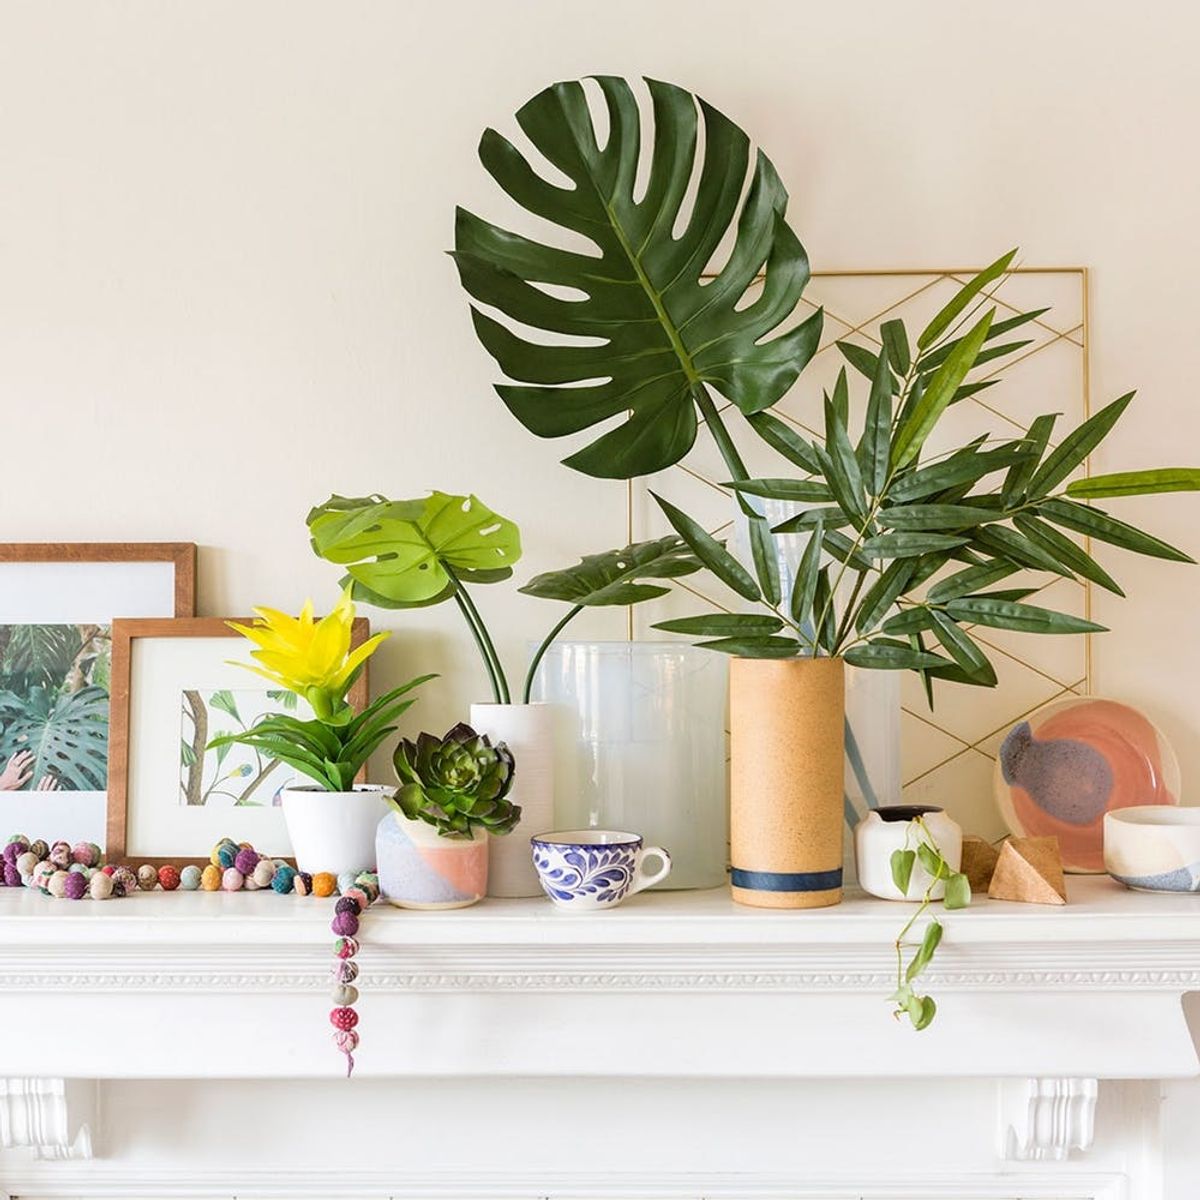 Pick These Artificial Plants for Fauxliage That Doesn’t Look So Faux